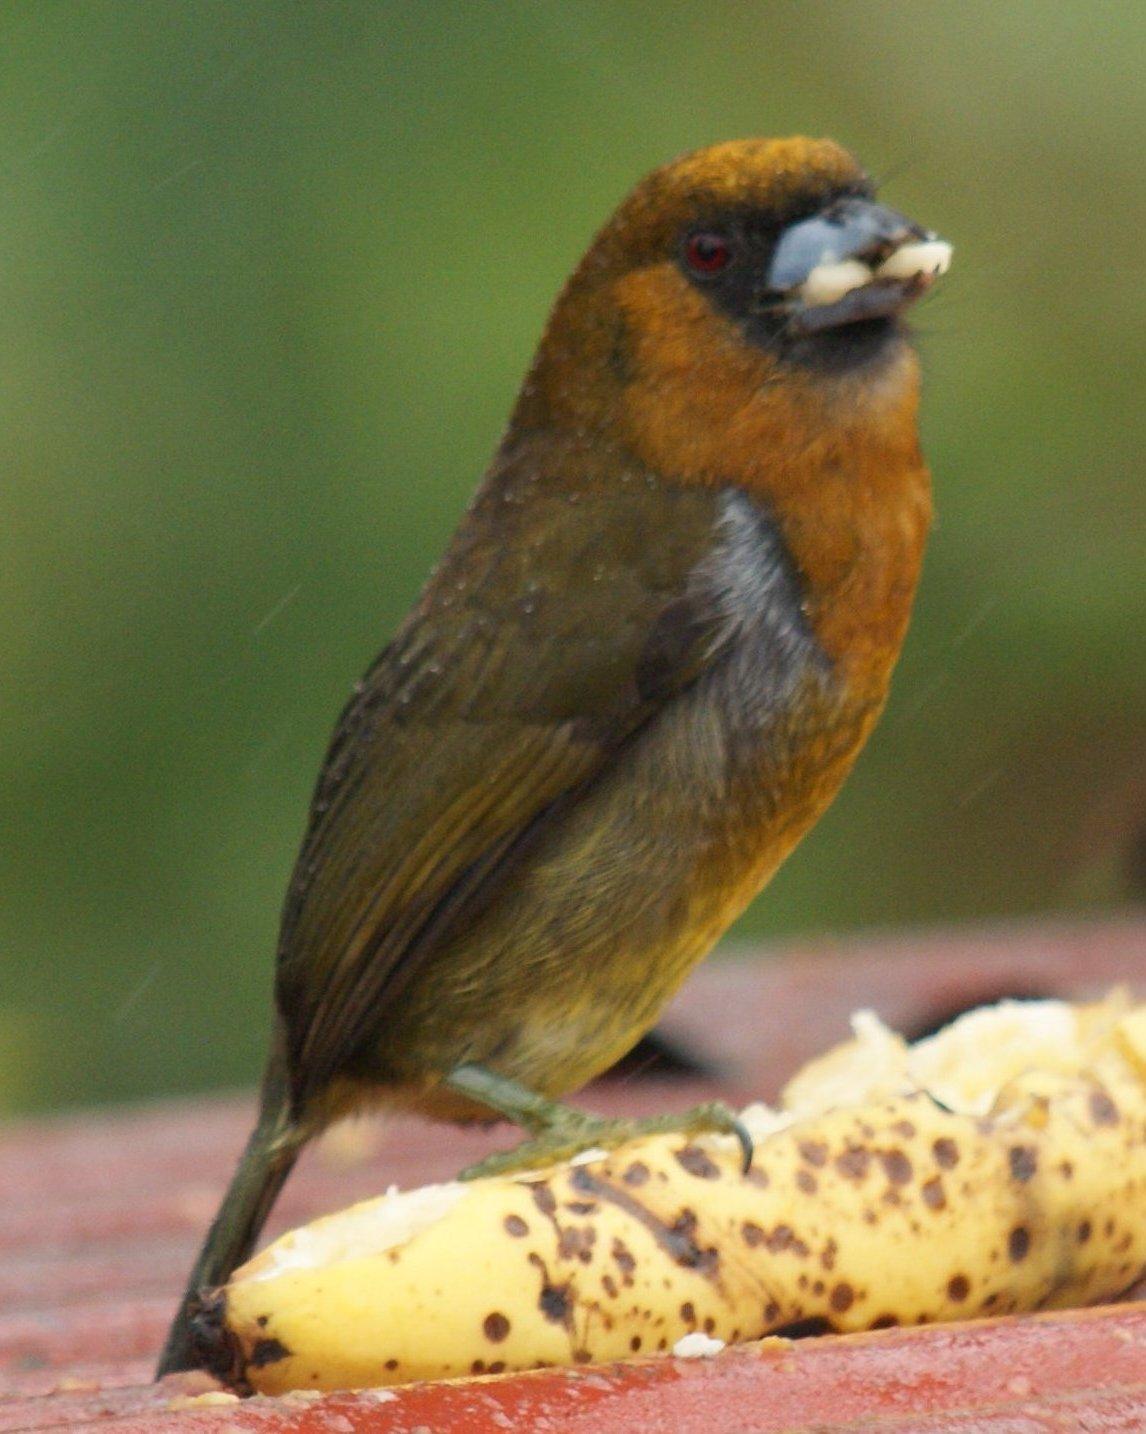 Prong-billed Barbet Photo by Robin Oxley